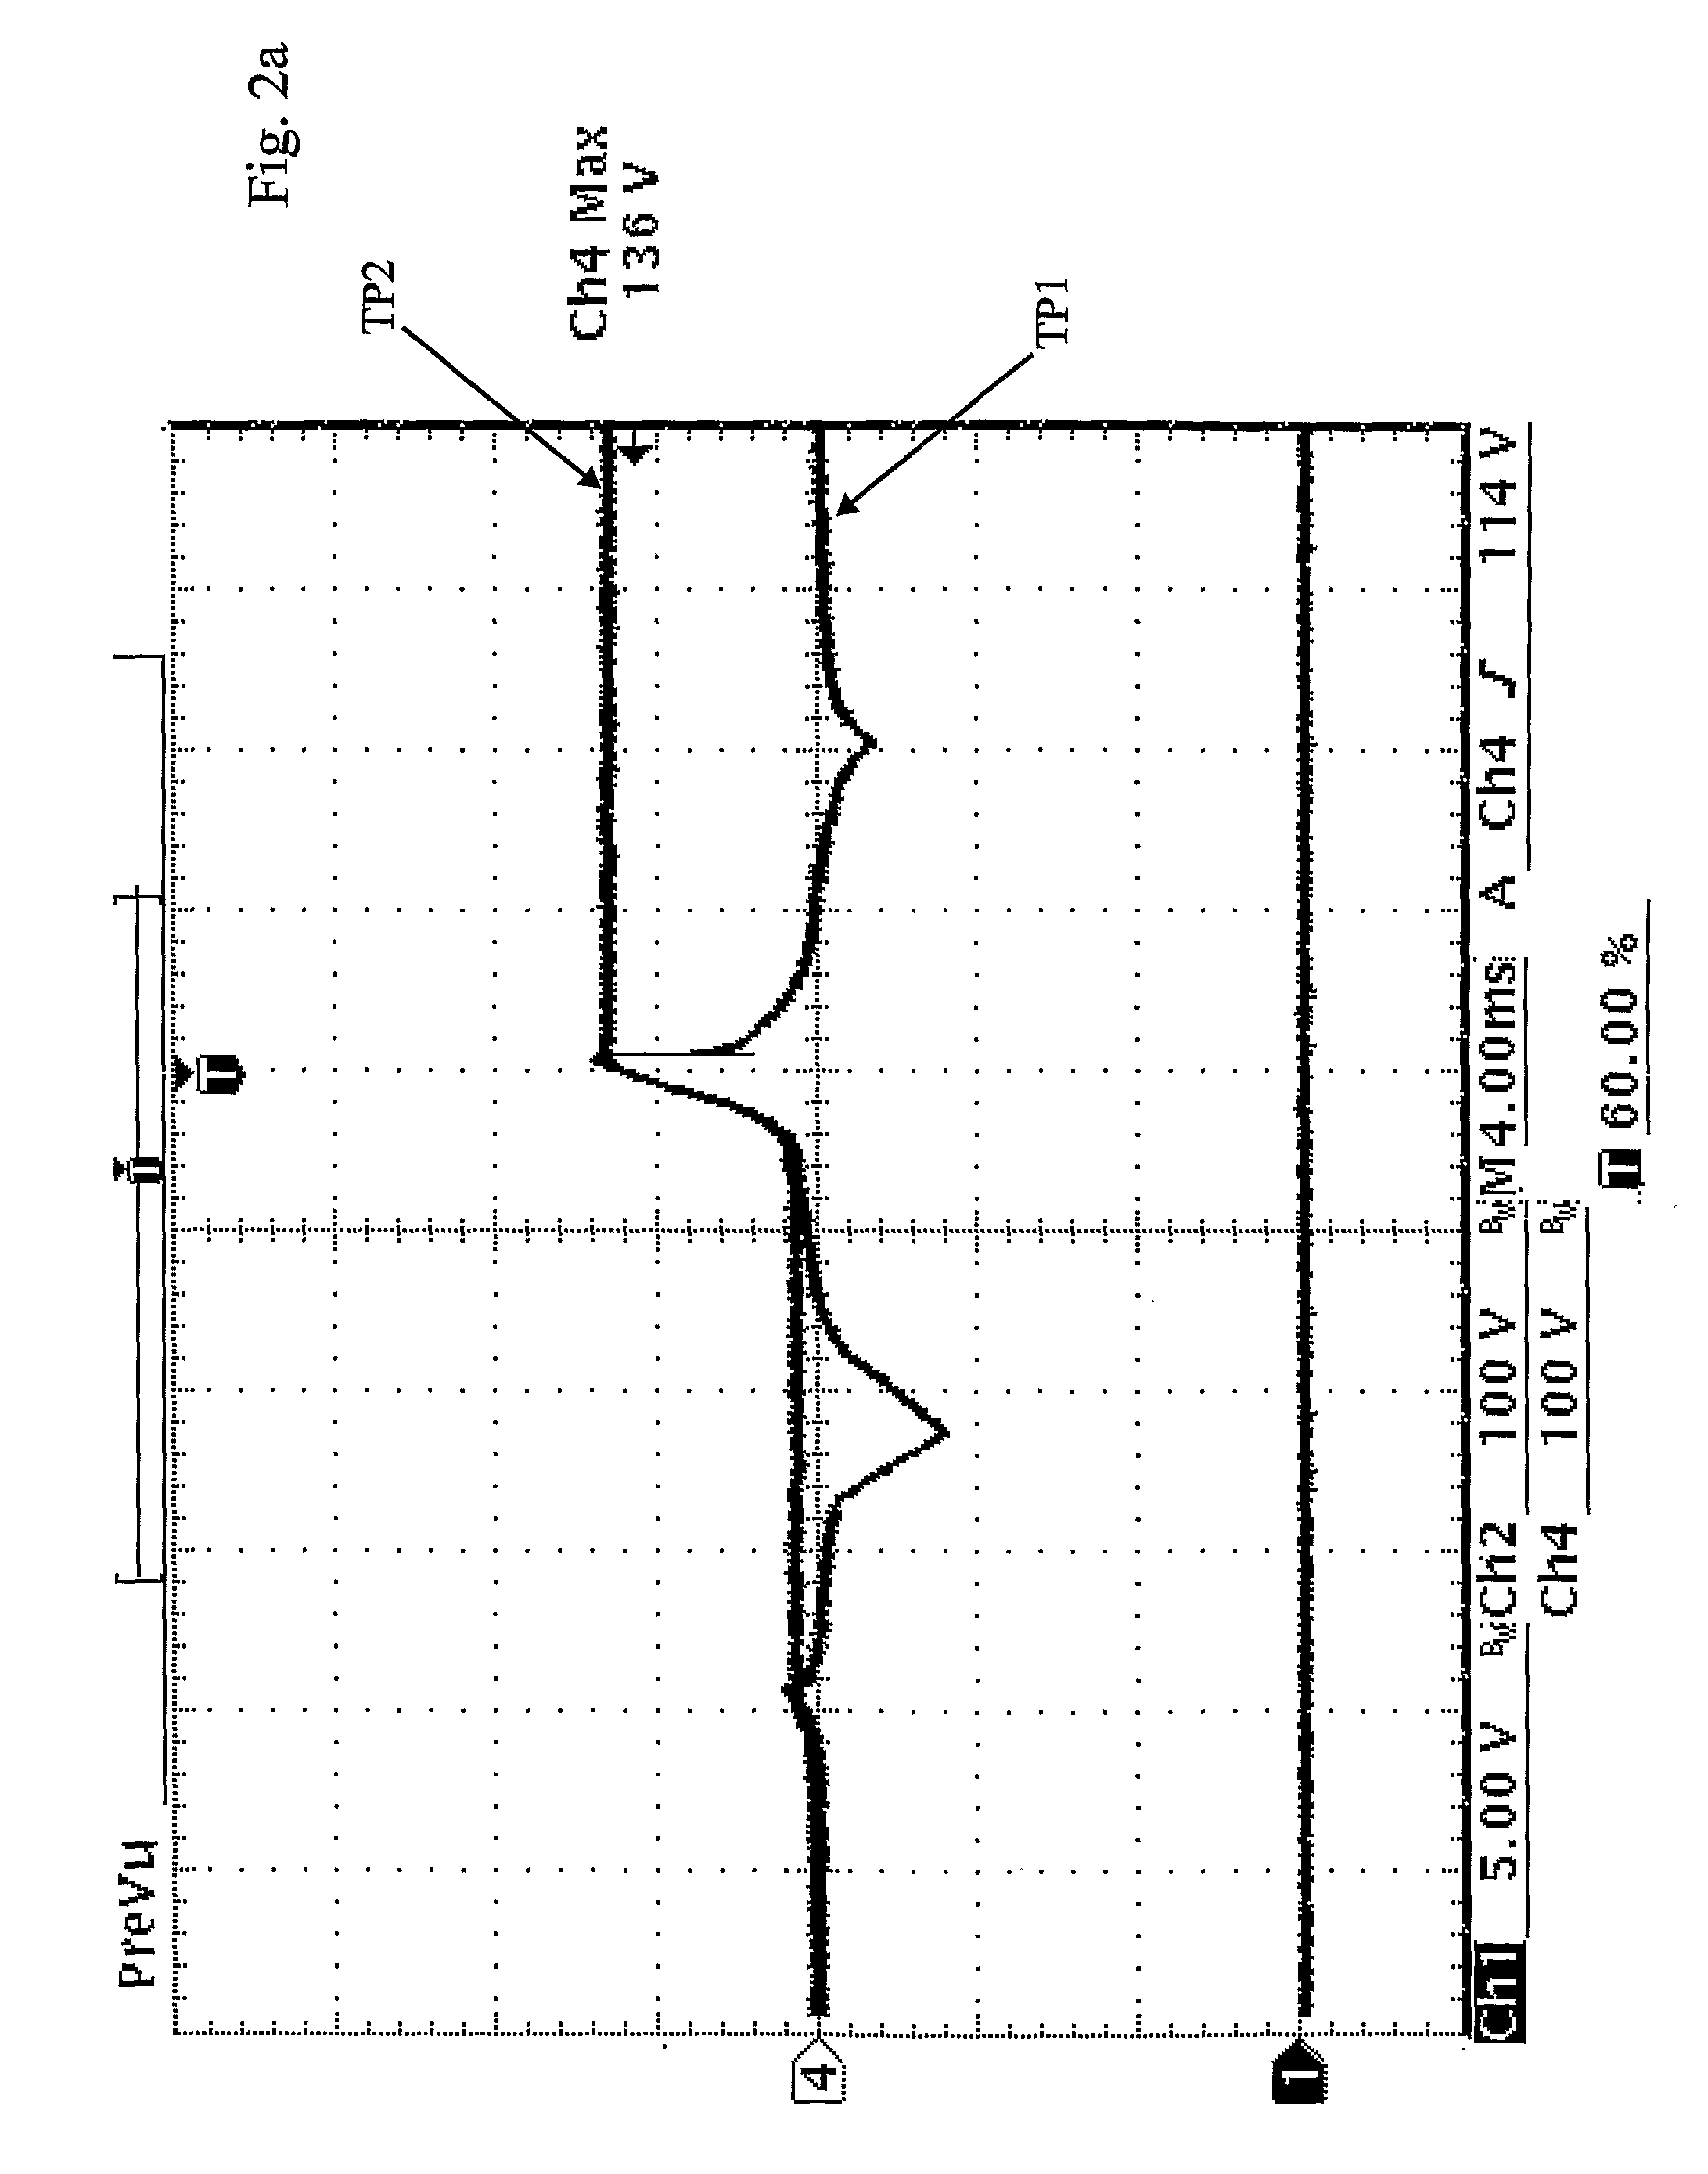 Method and apparatus for raising the spark energy in capacitive ignition systems